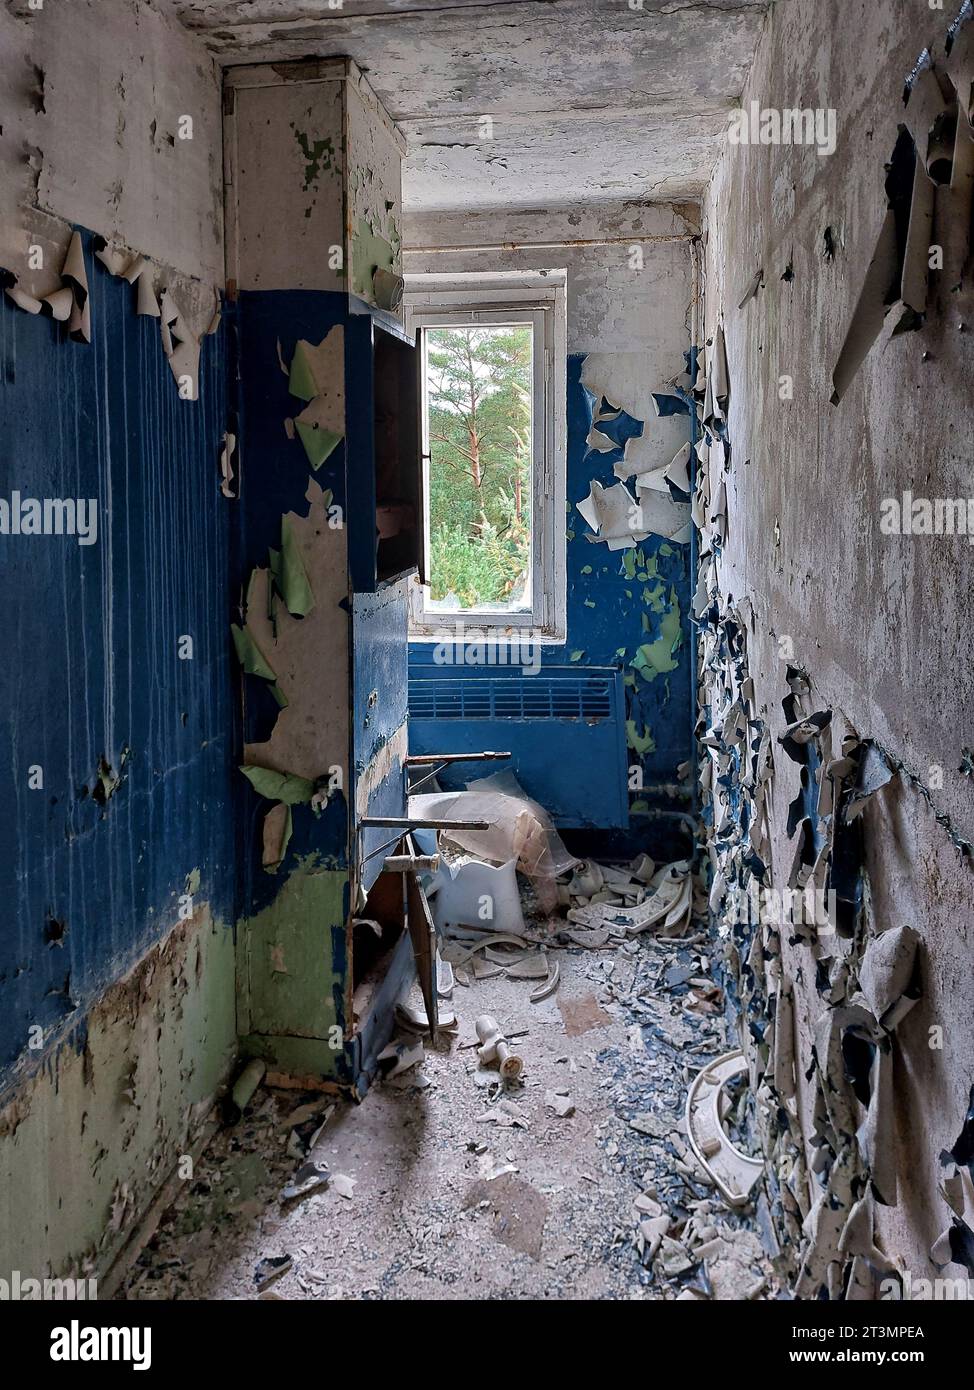 Ruins of bathroom with paint falling off the walls. Stock Photo